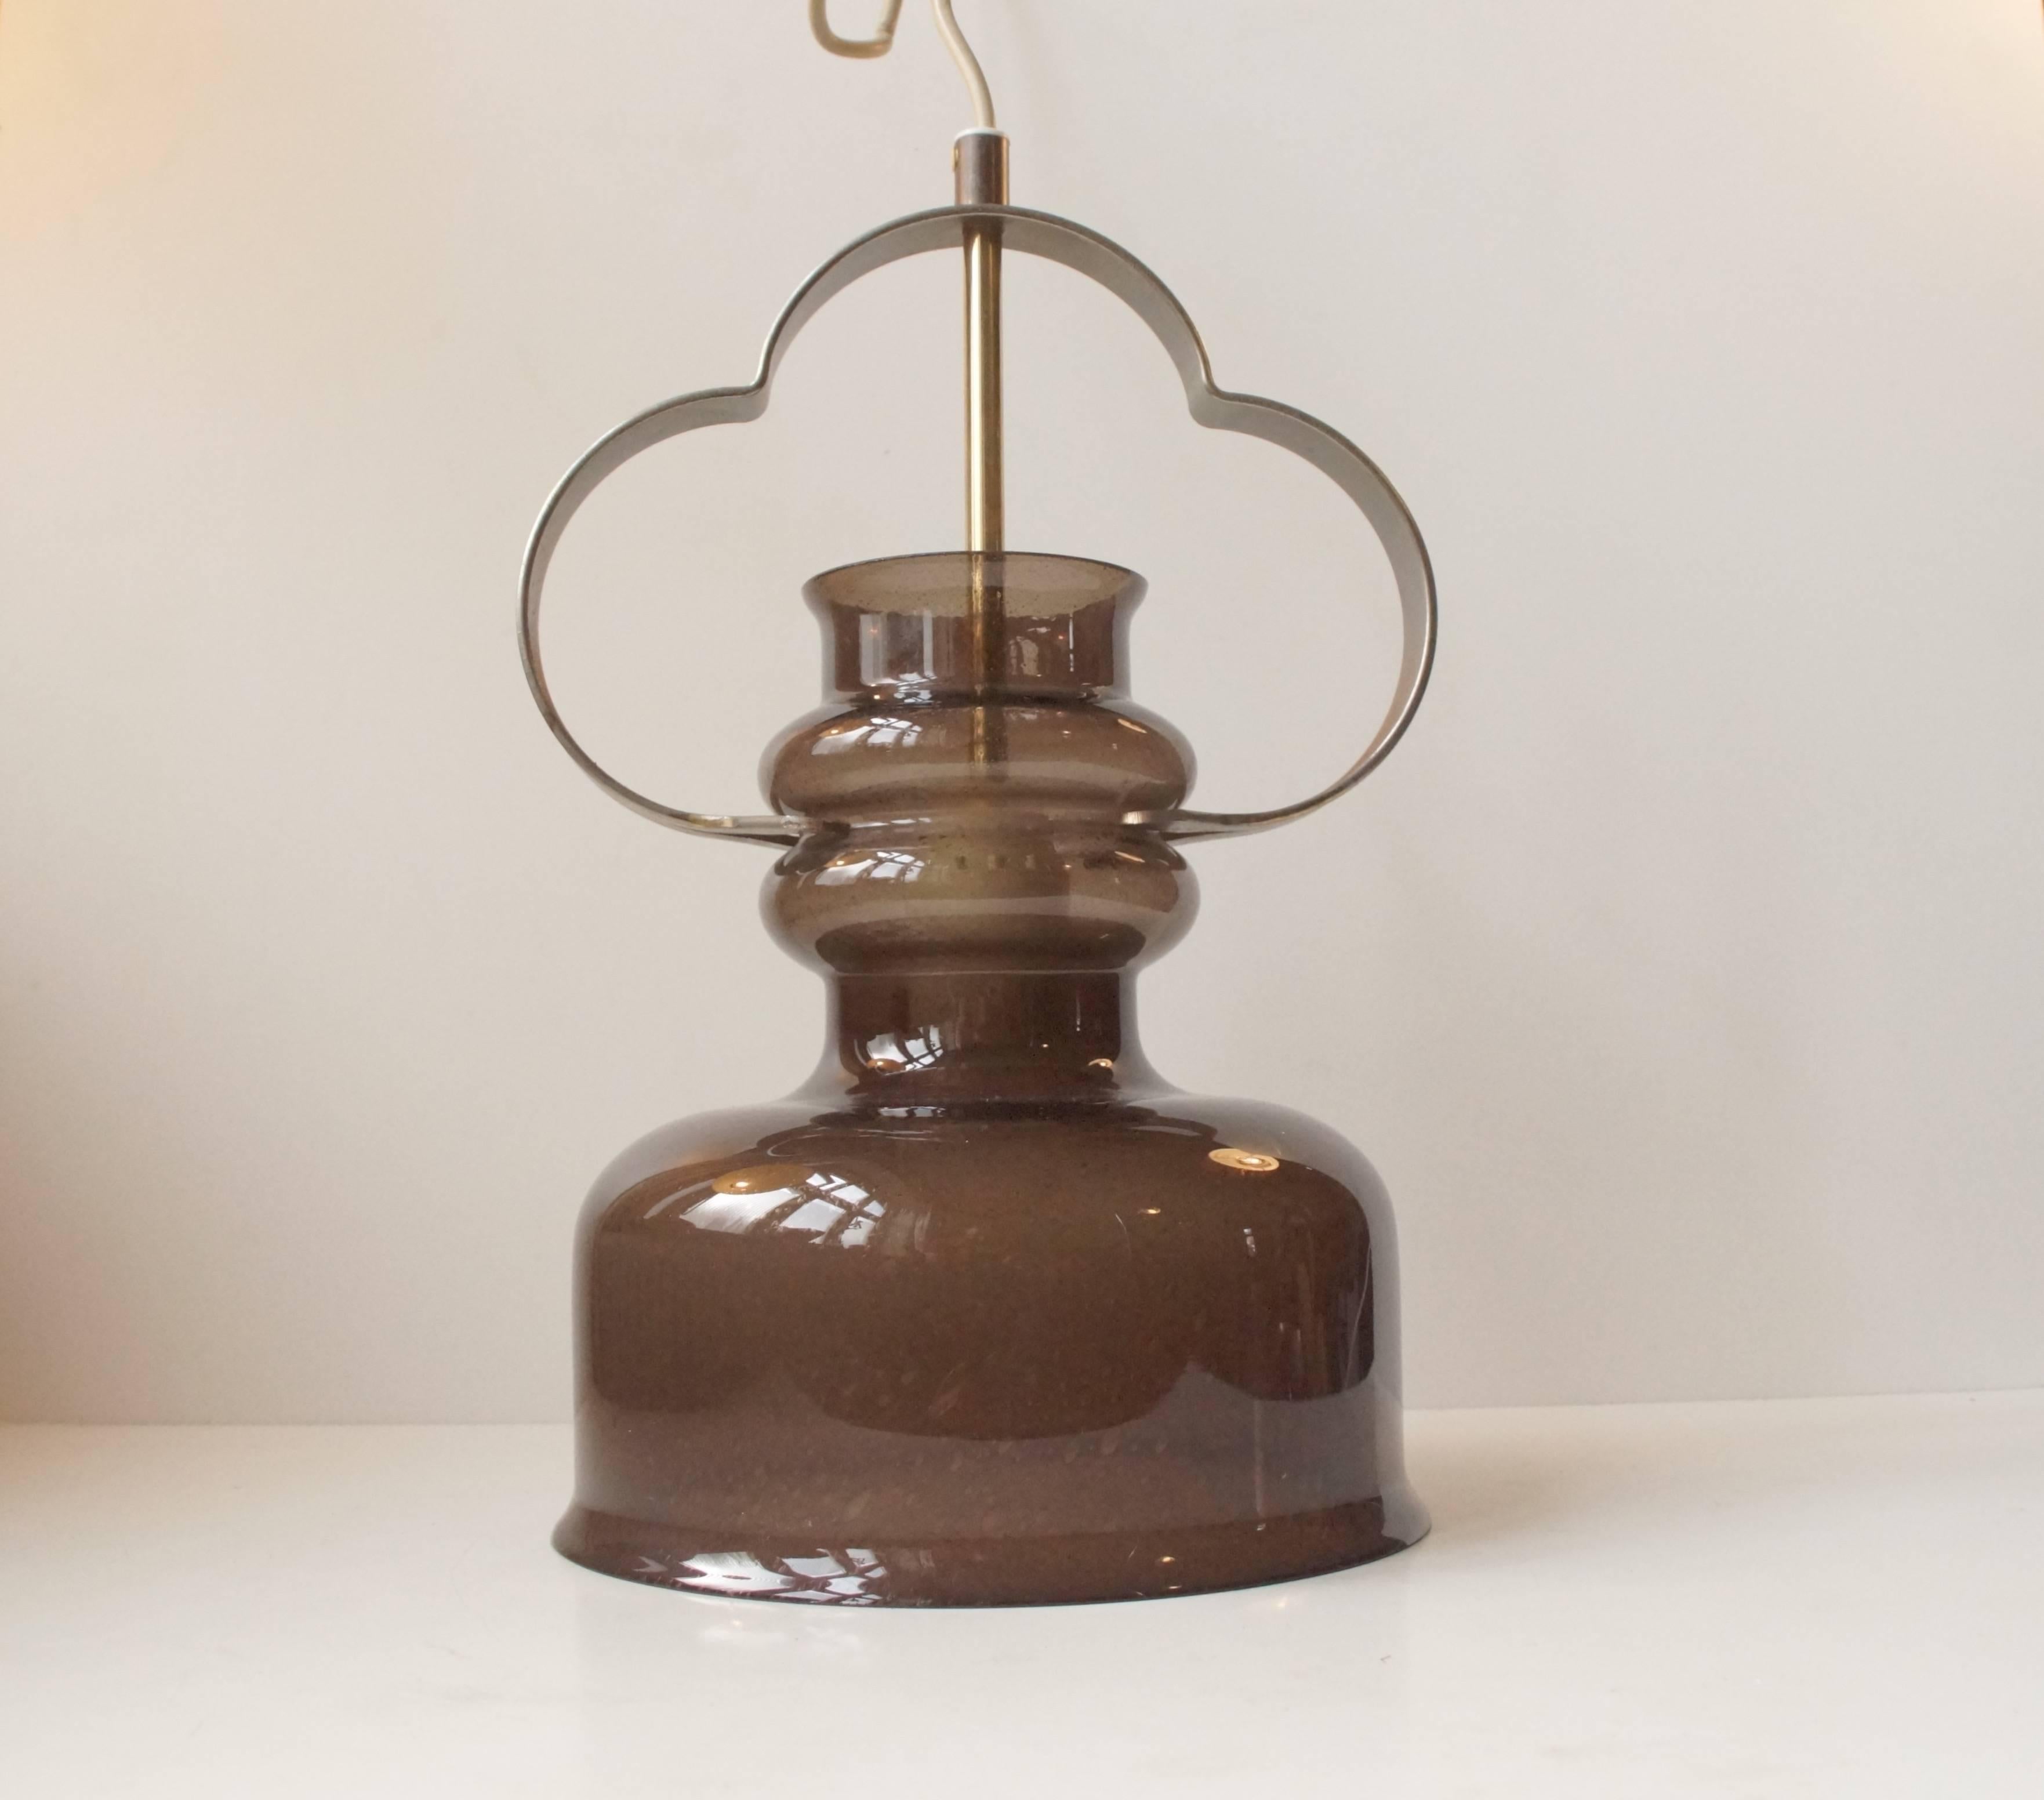 Rare pendant lamp in 'Smokey' handblown brown glass with watery bubbles. The top part of the lamp is shapes as a three clover - bringing you good luck and prosperity when Lid:-). Measurements: H 13 inches (33 cm), D 8.2 inches (21 cm).